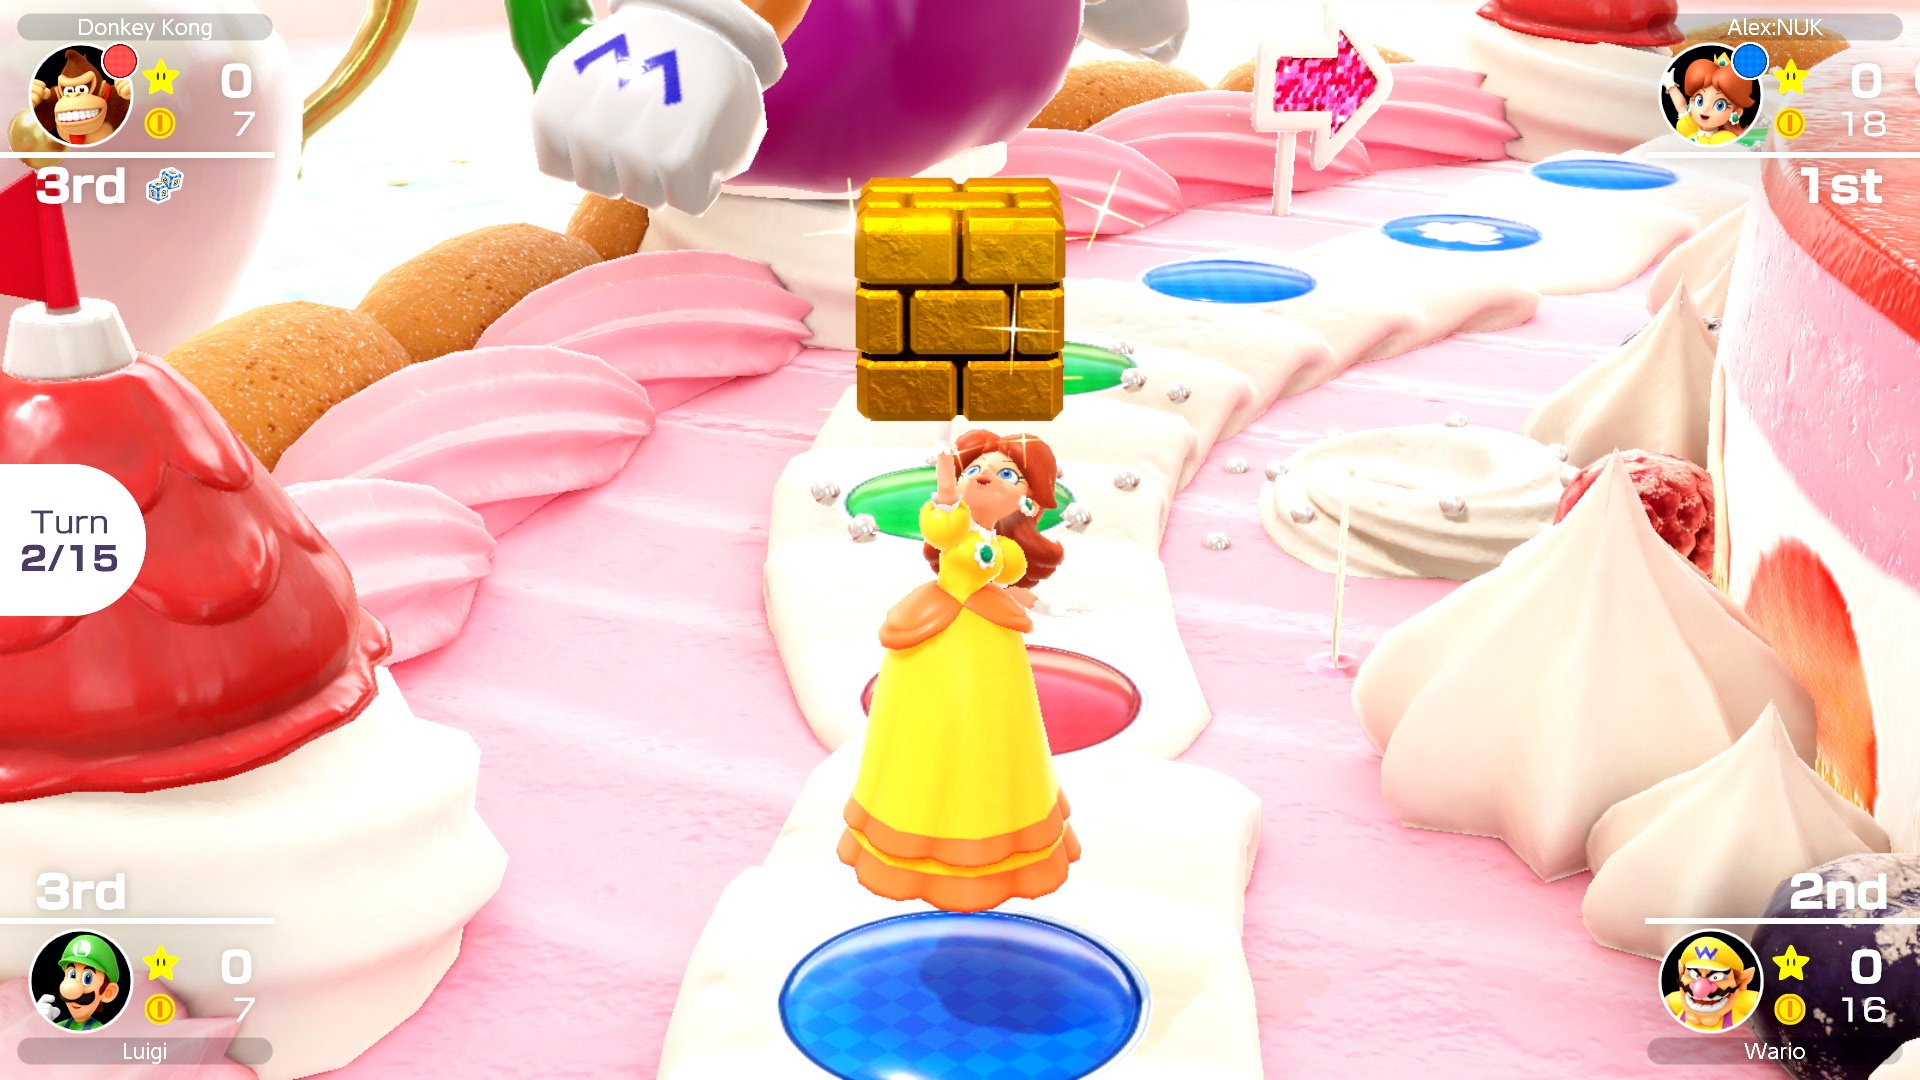 this way that mario party 2